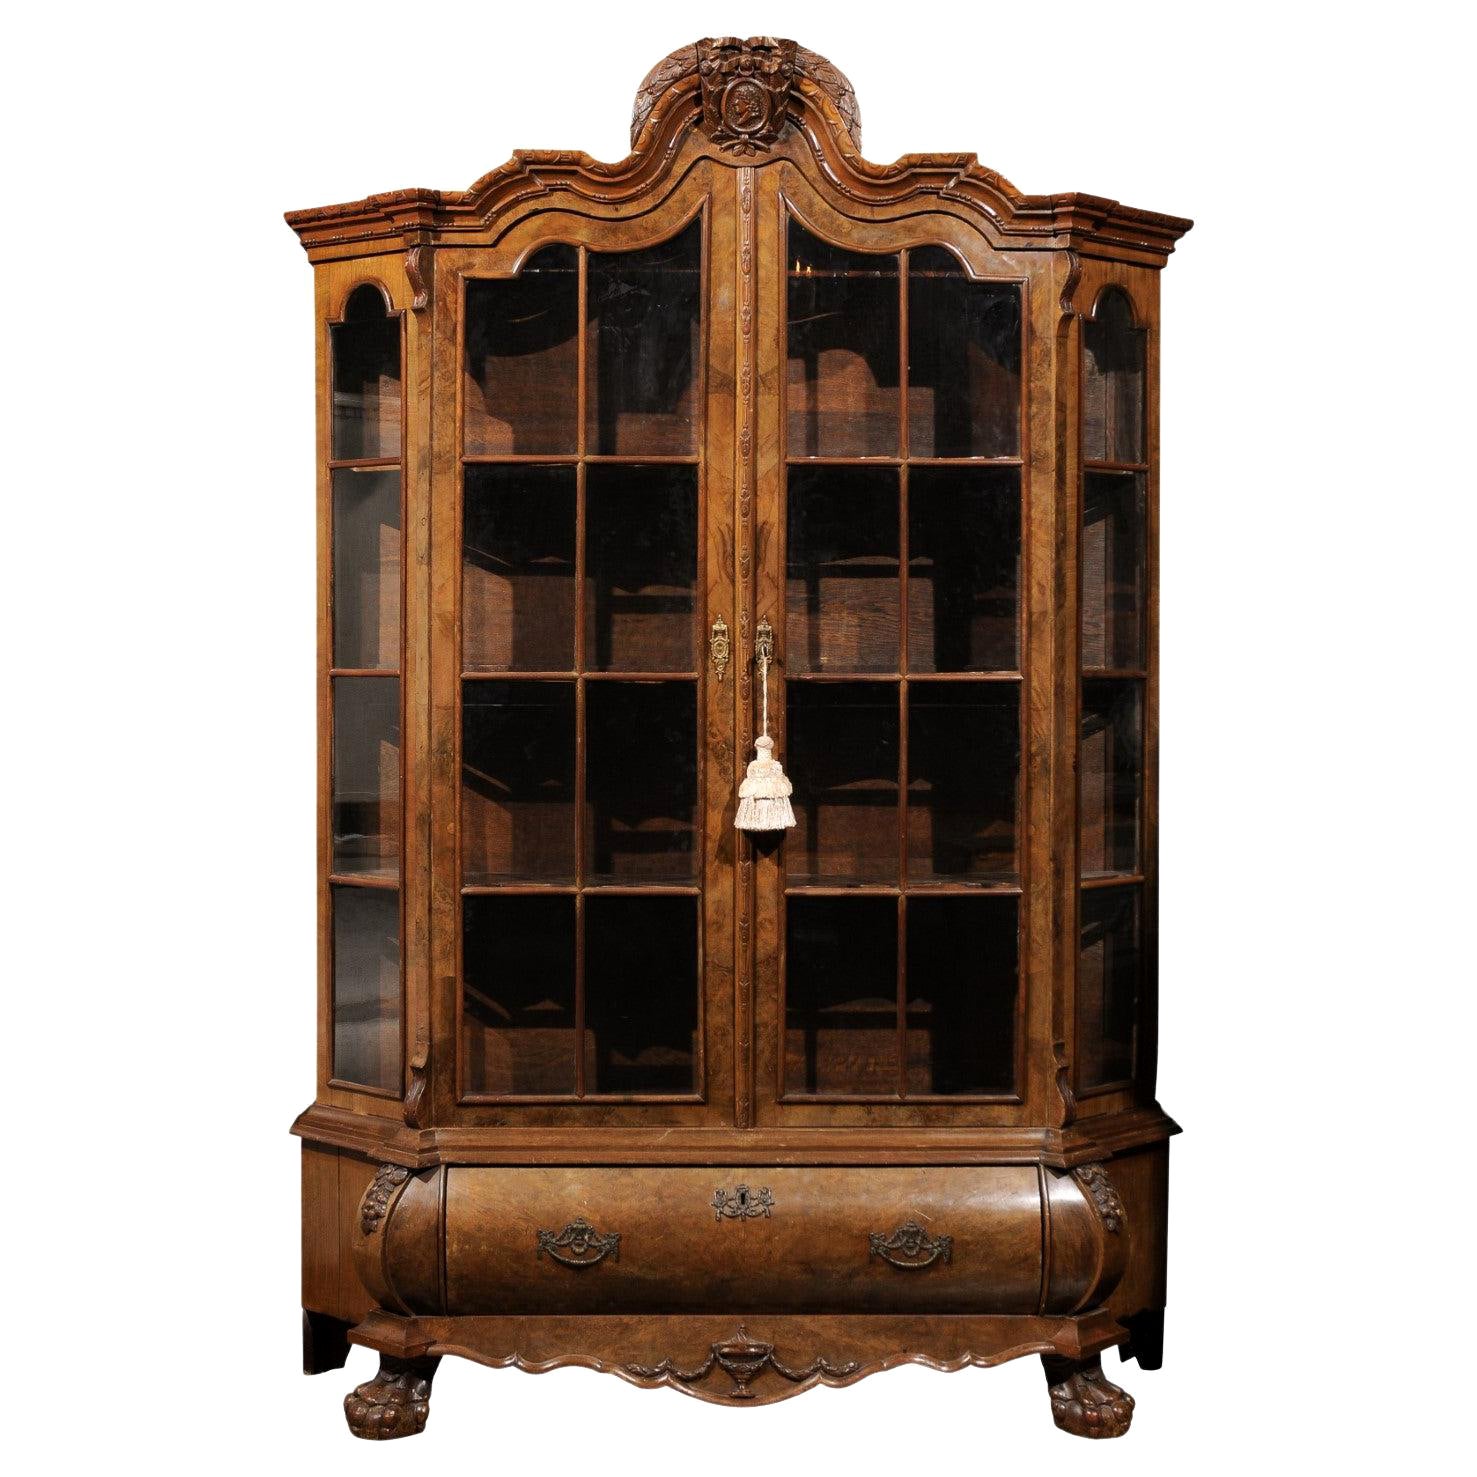 Dutch Rococo Revival 1890s Bombé Vitrine Display Cabinet with Carved Medallion For Sale